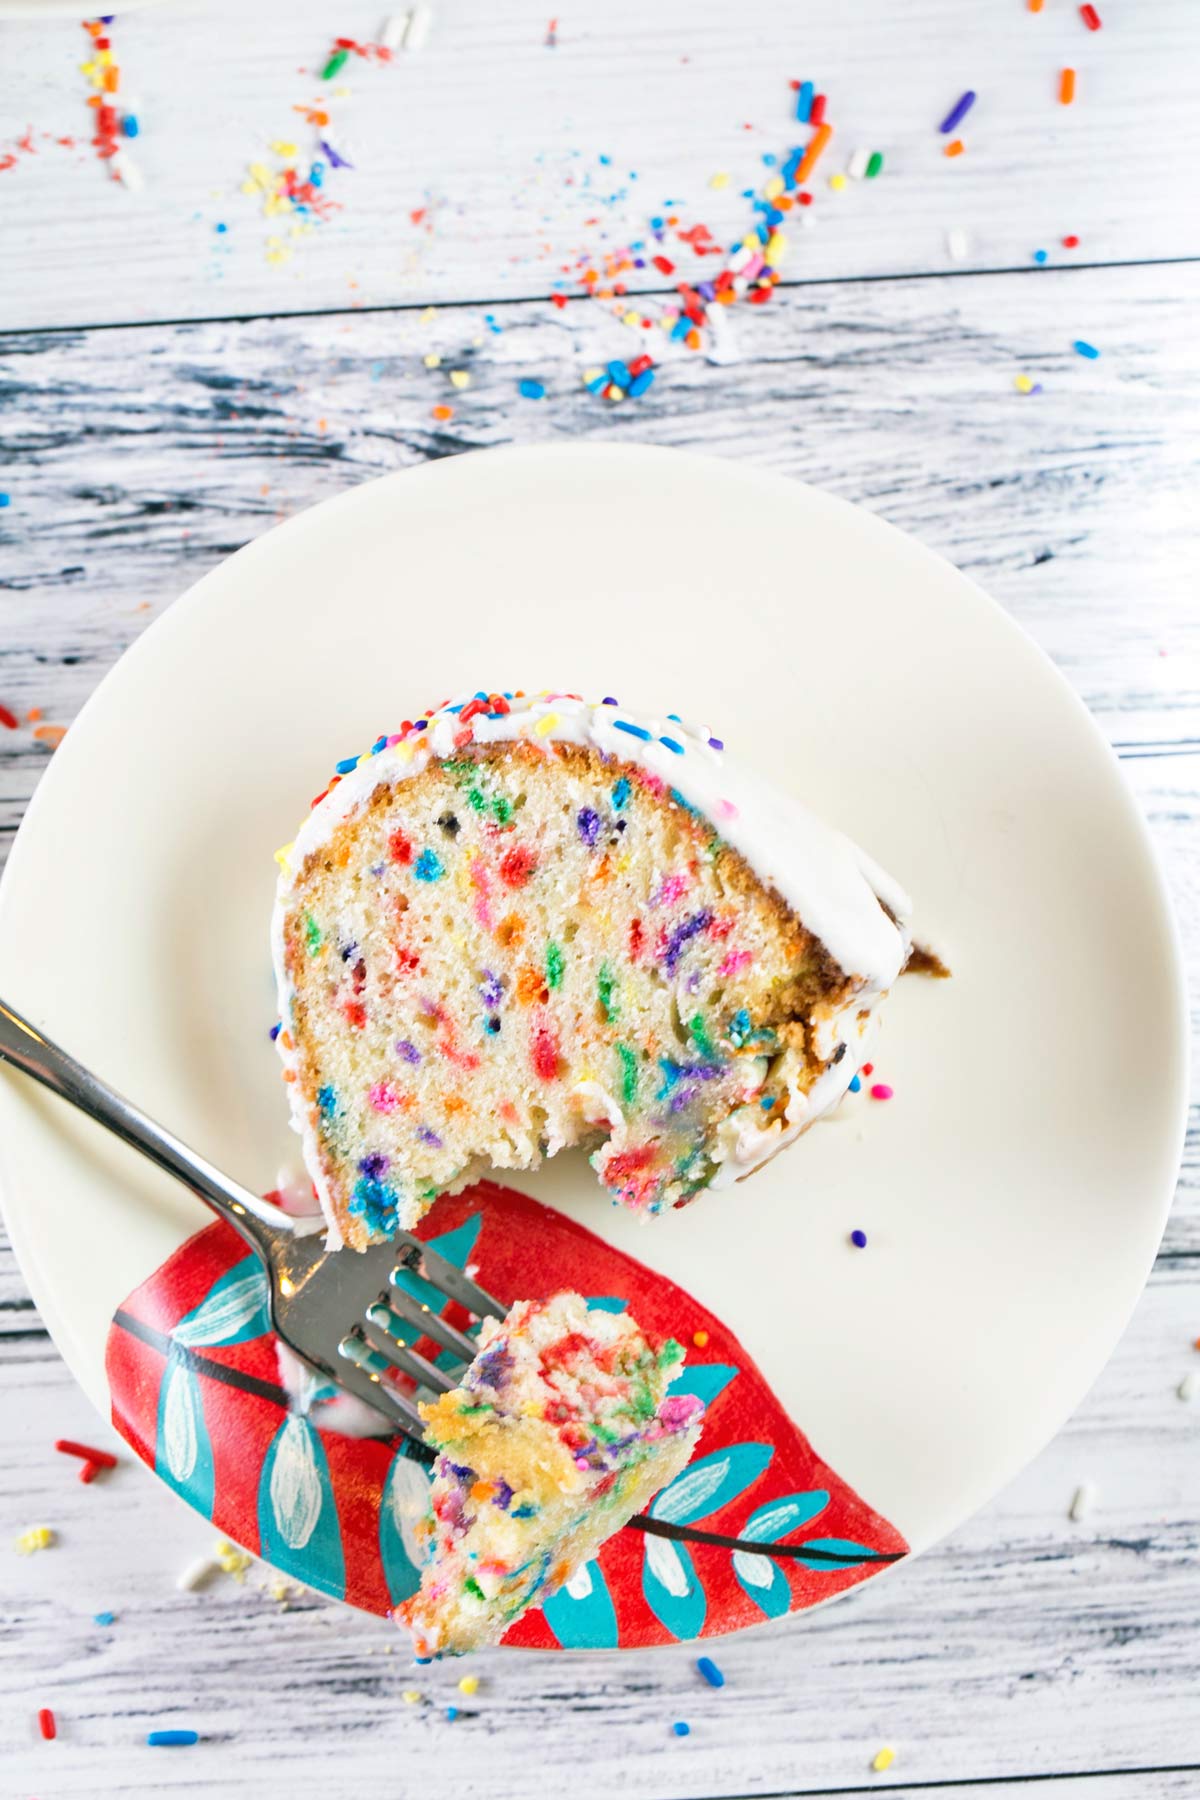 slice of colorful funfetti bundt cake on its side with one forkful removed.